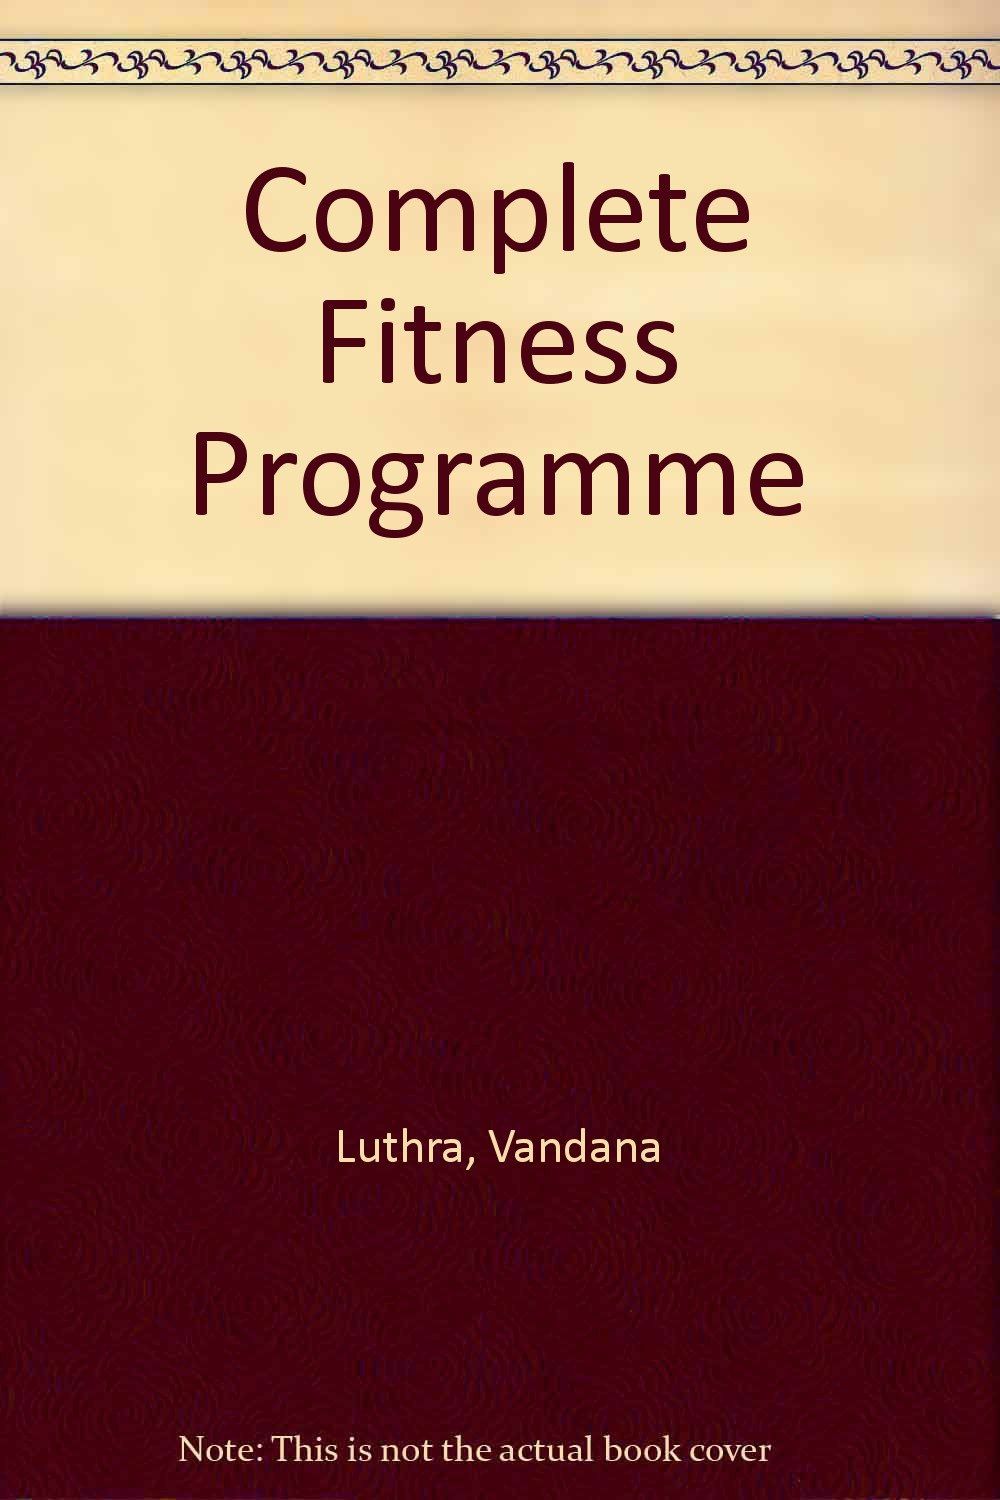 Complete Fitness Programme